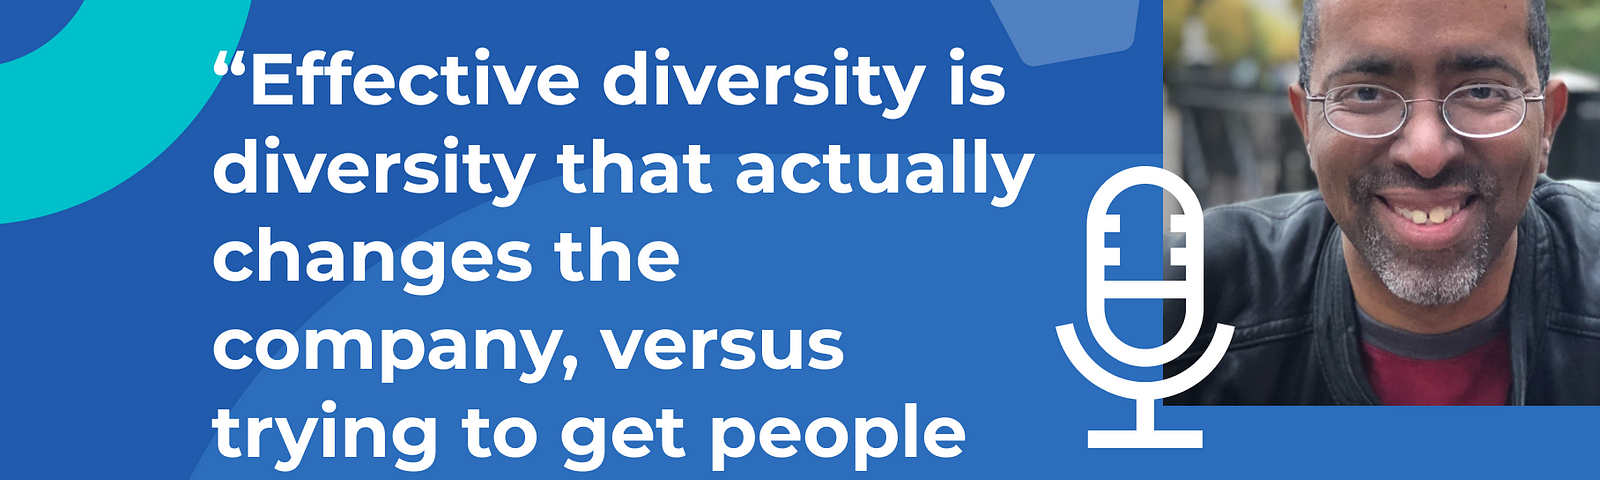 eFFECTIVE DIVERSITY IS DIVERSITY THAT ACTUALLY CHANGES THE COMPANY versus trying to get people to assimilate